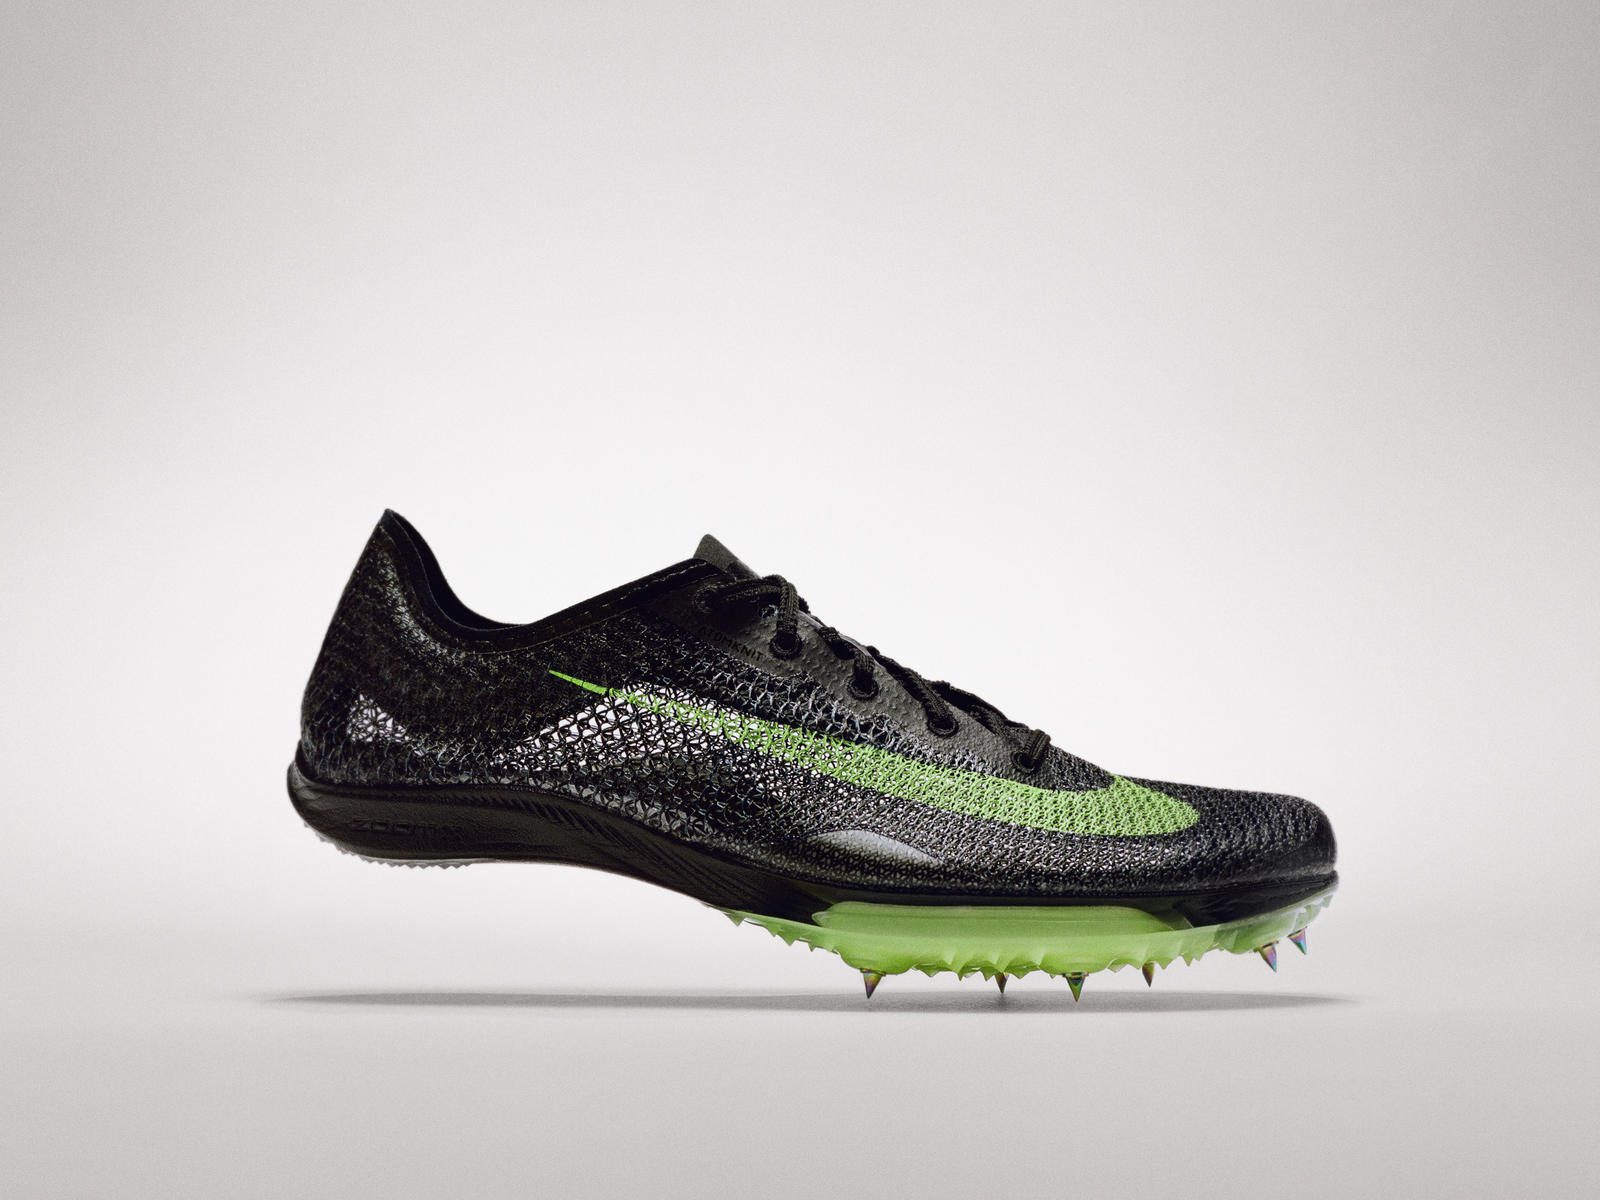 Nike's newly-released plated spikes 